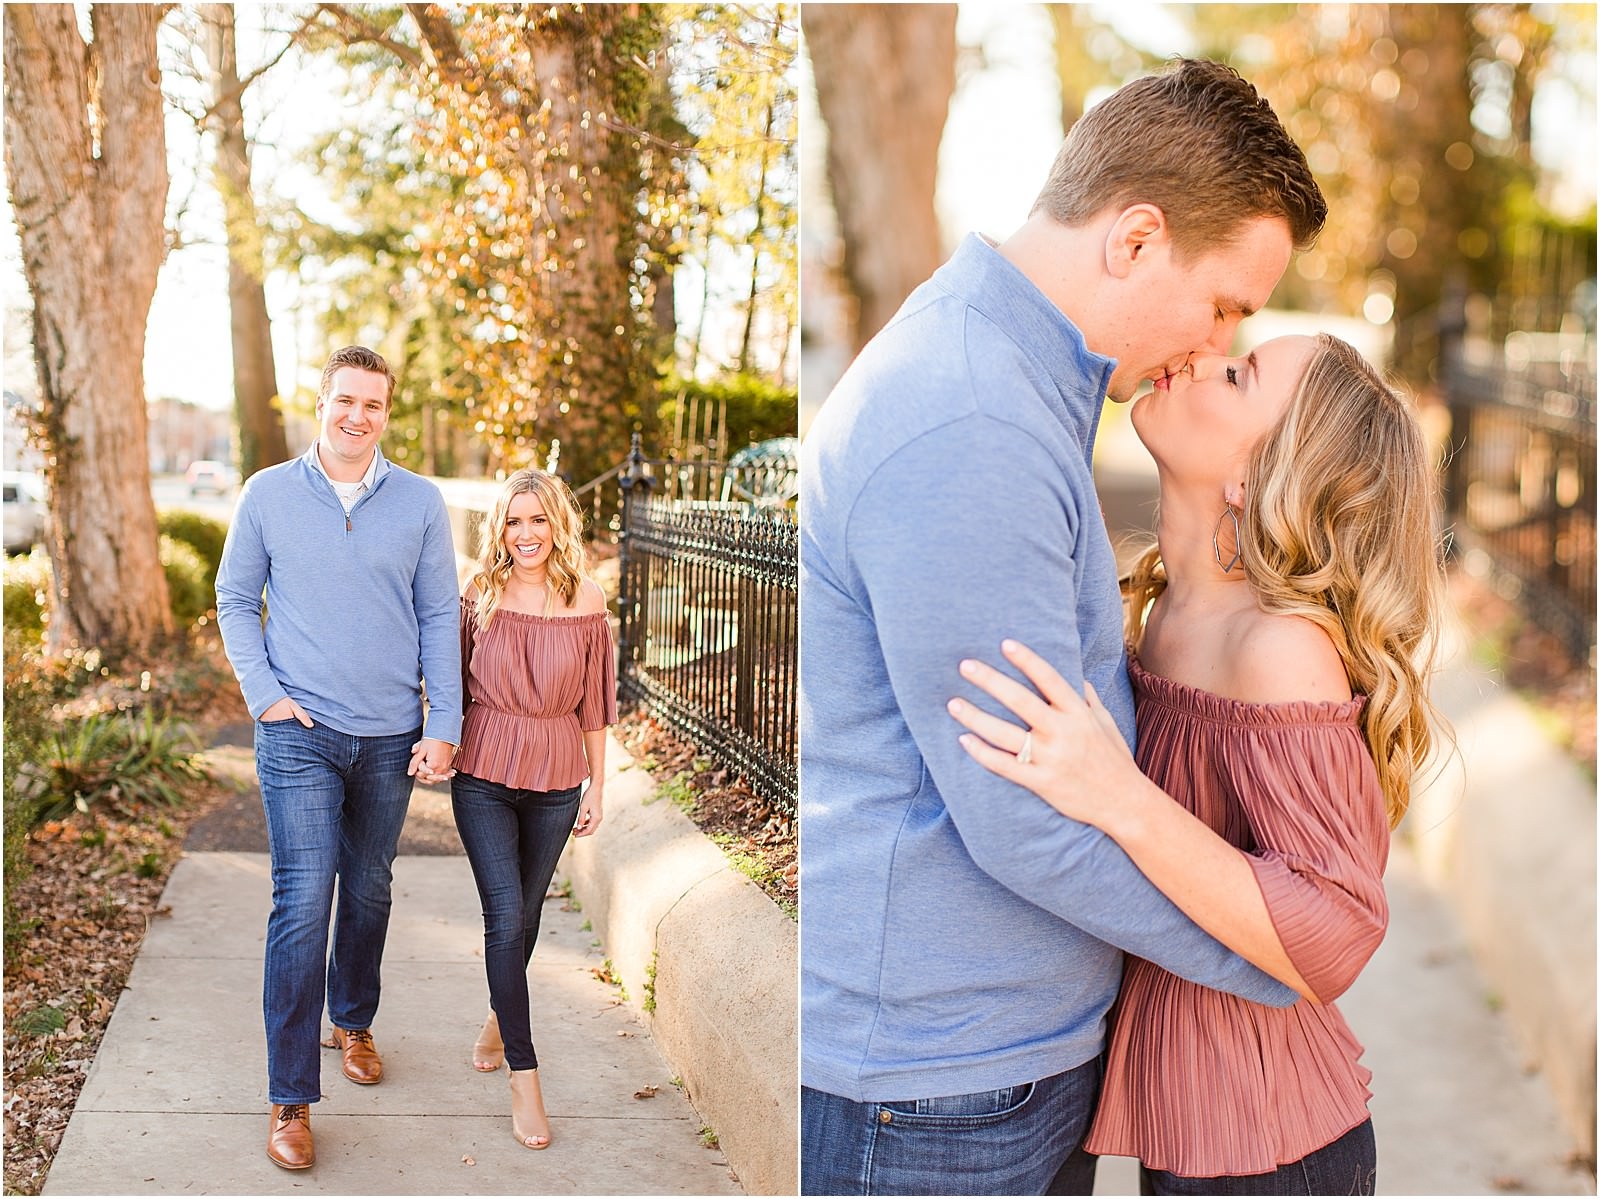 Madison and Christaan | A 20 West Engagement Session in Downto wn Newburgh | Bret and Brandie Photography030.jpg